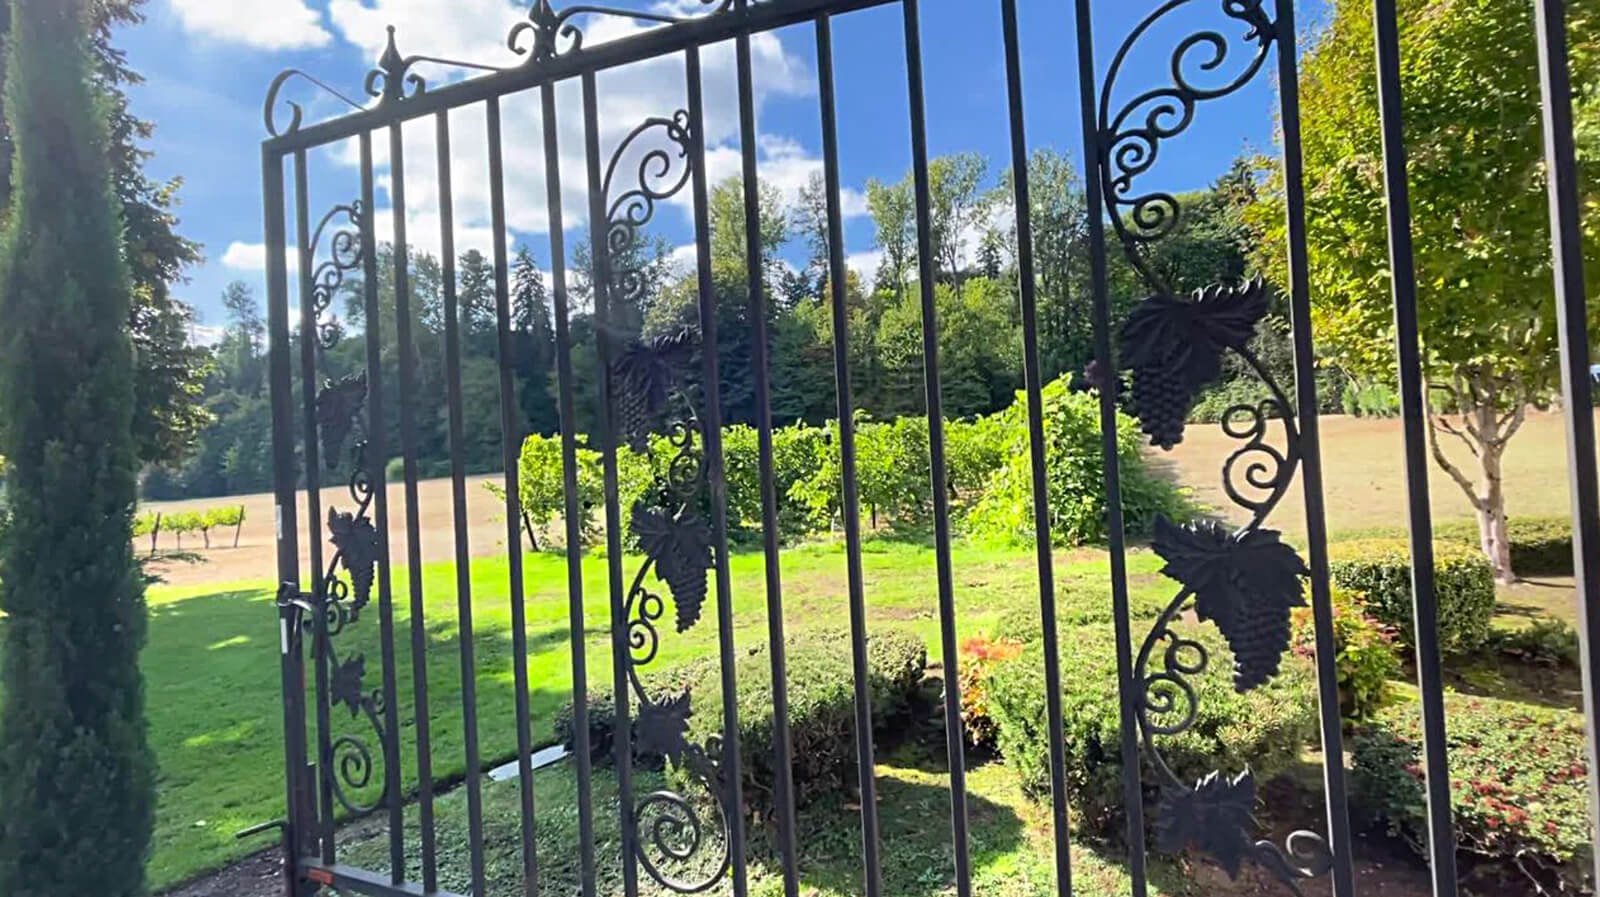 Iron-gate-opeing-to-a-Vineyard-in-Woodinville-Washington